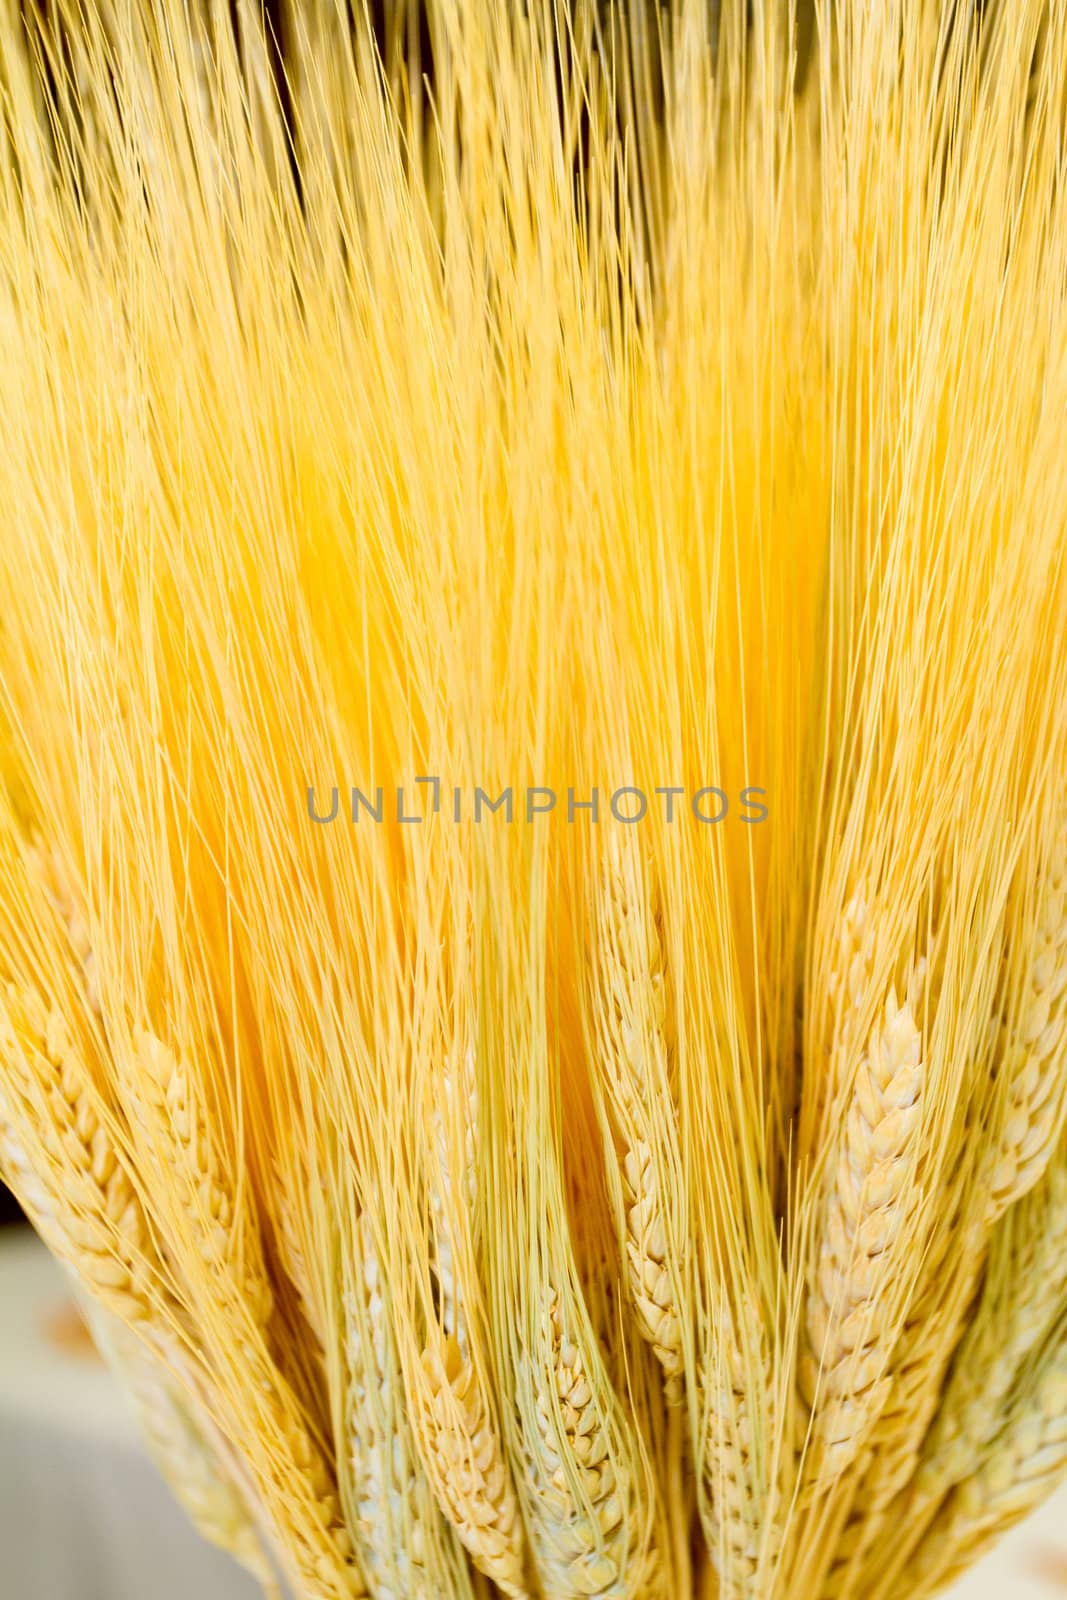 A bundle of wheat is wrapped and used for decor at a harvest style wedding.